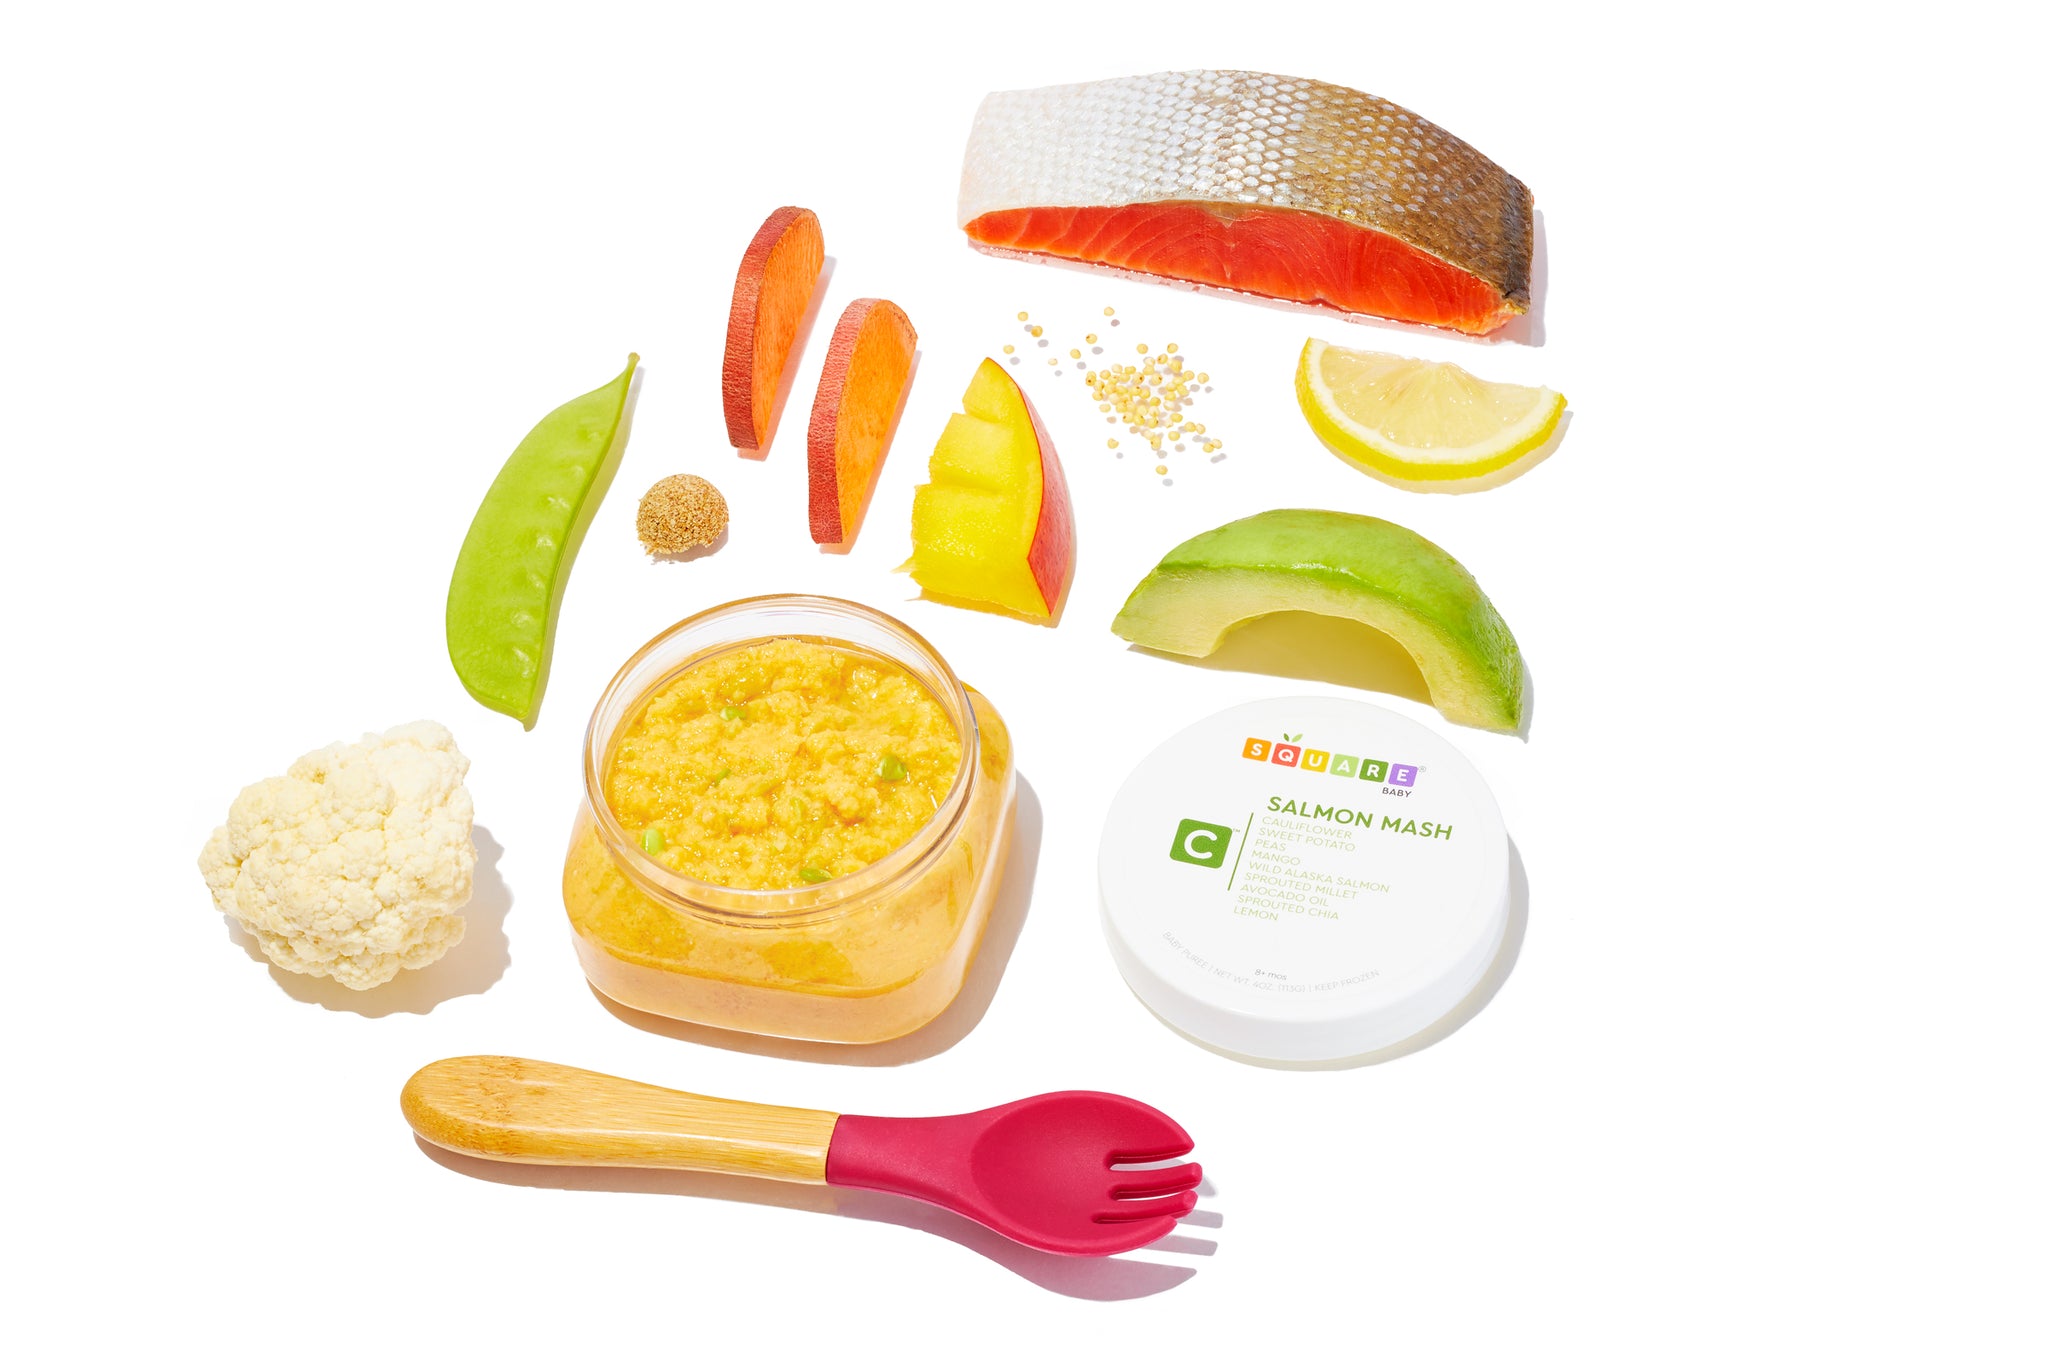 square baby - best baby food voted by healthline - recommended by doctors